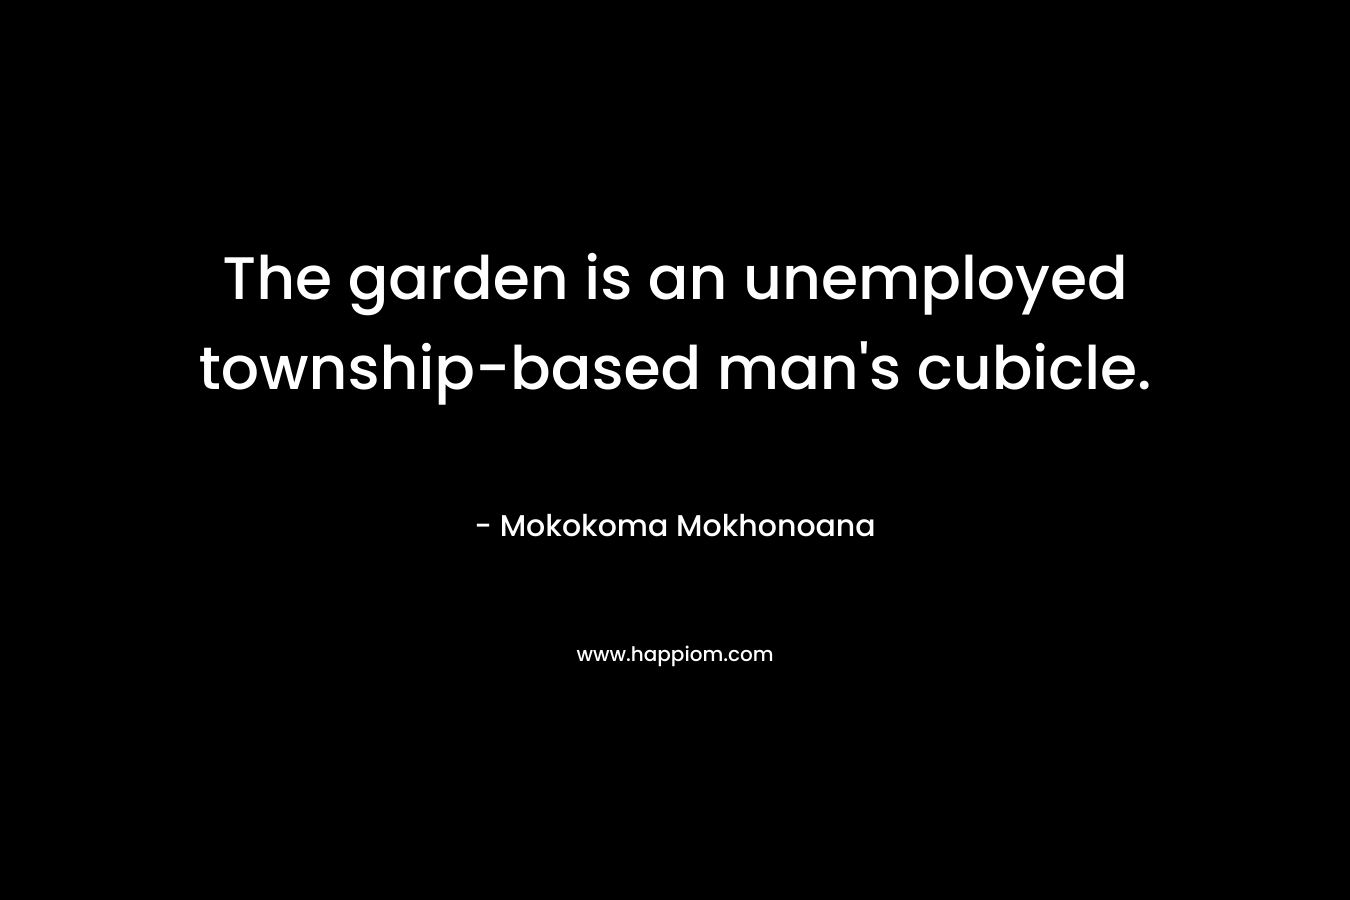 The garden is an unemployed township-based man's cubicle.